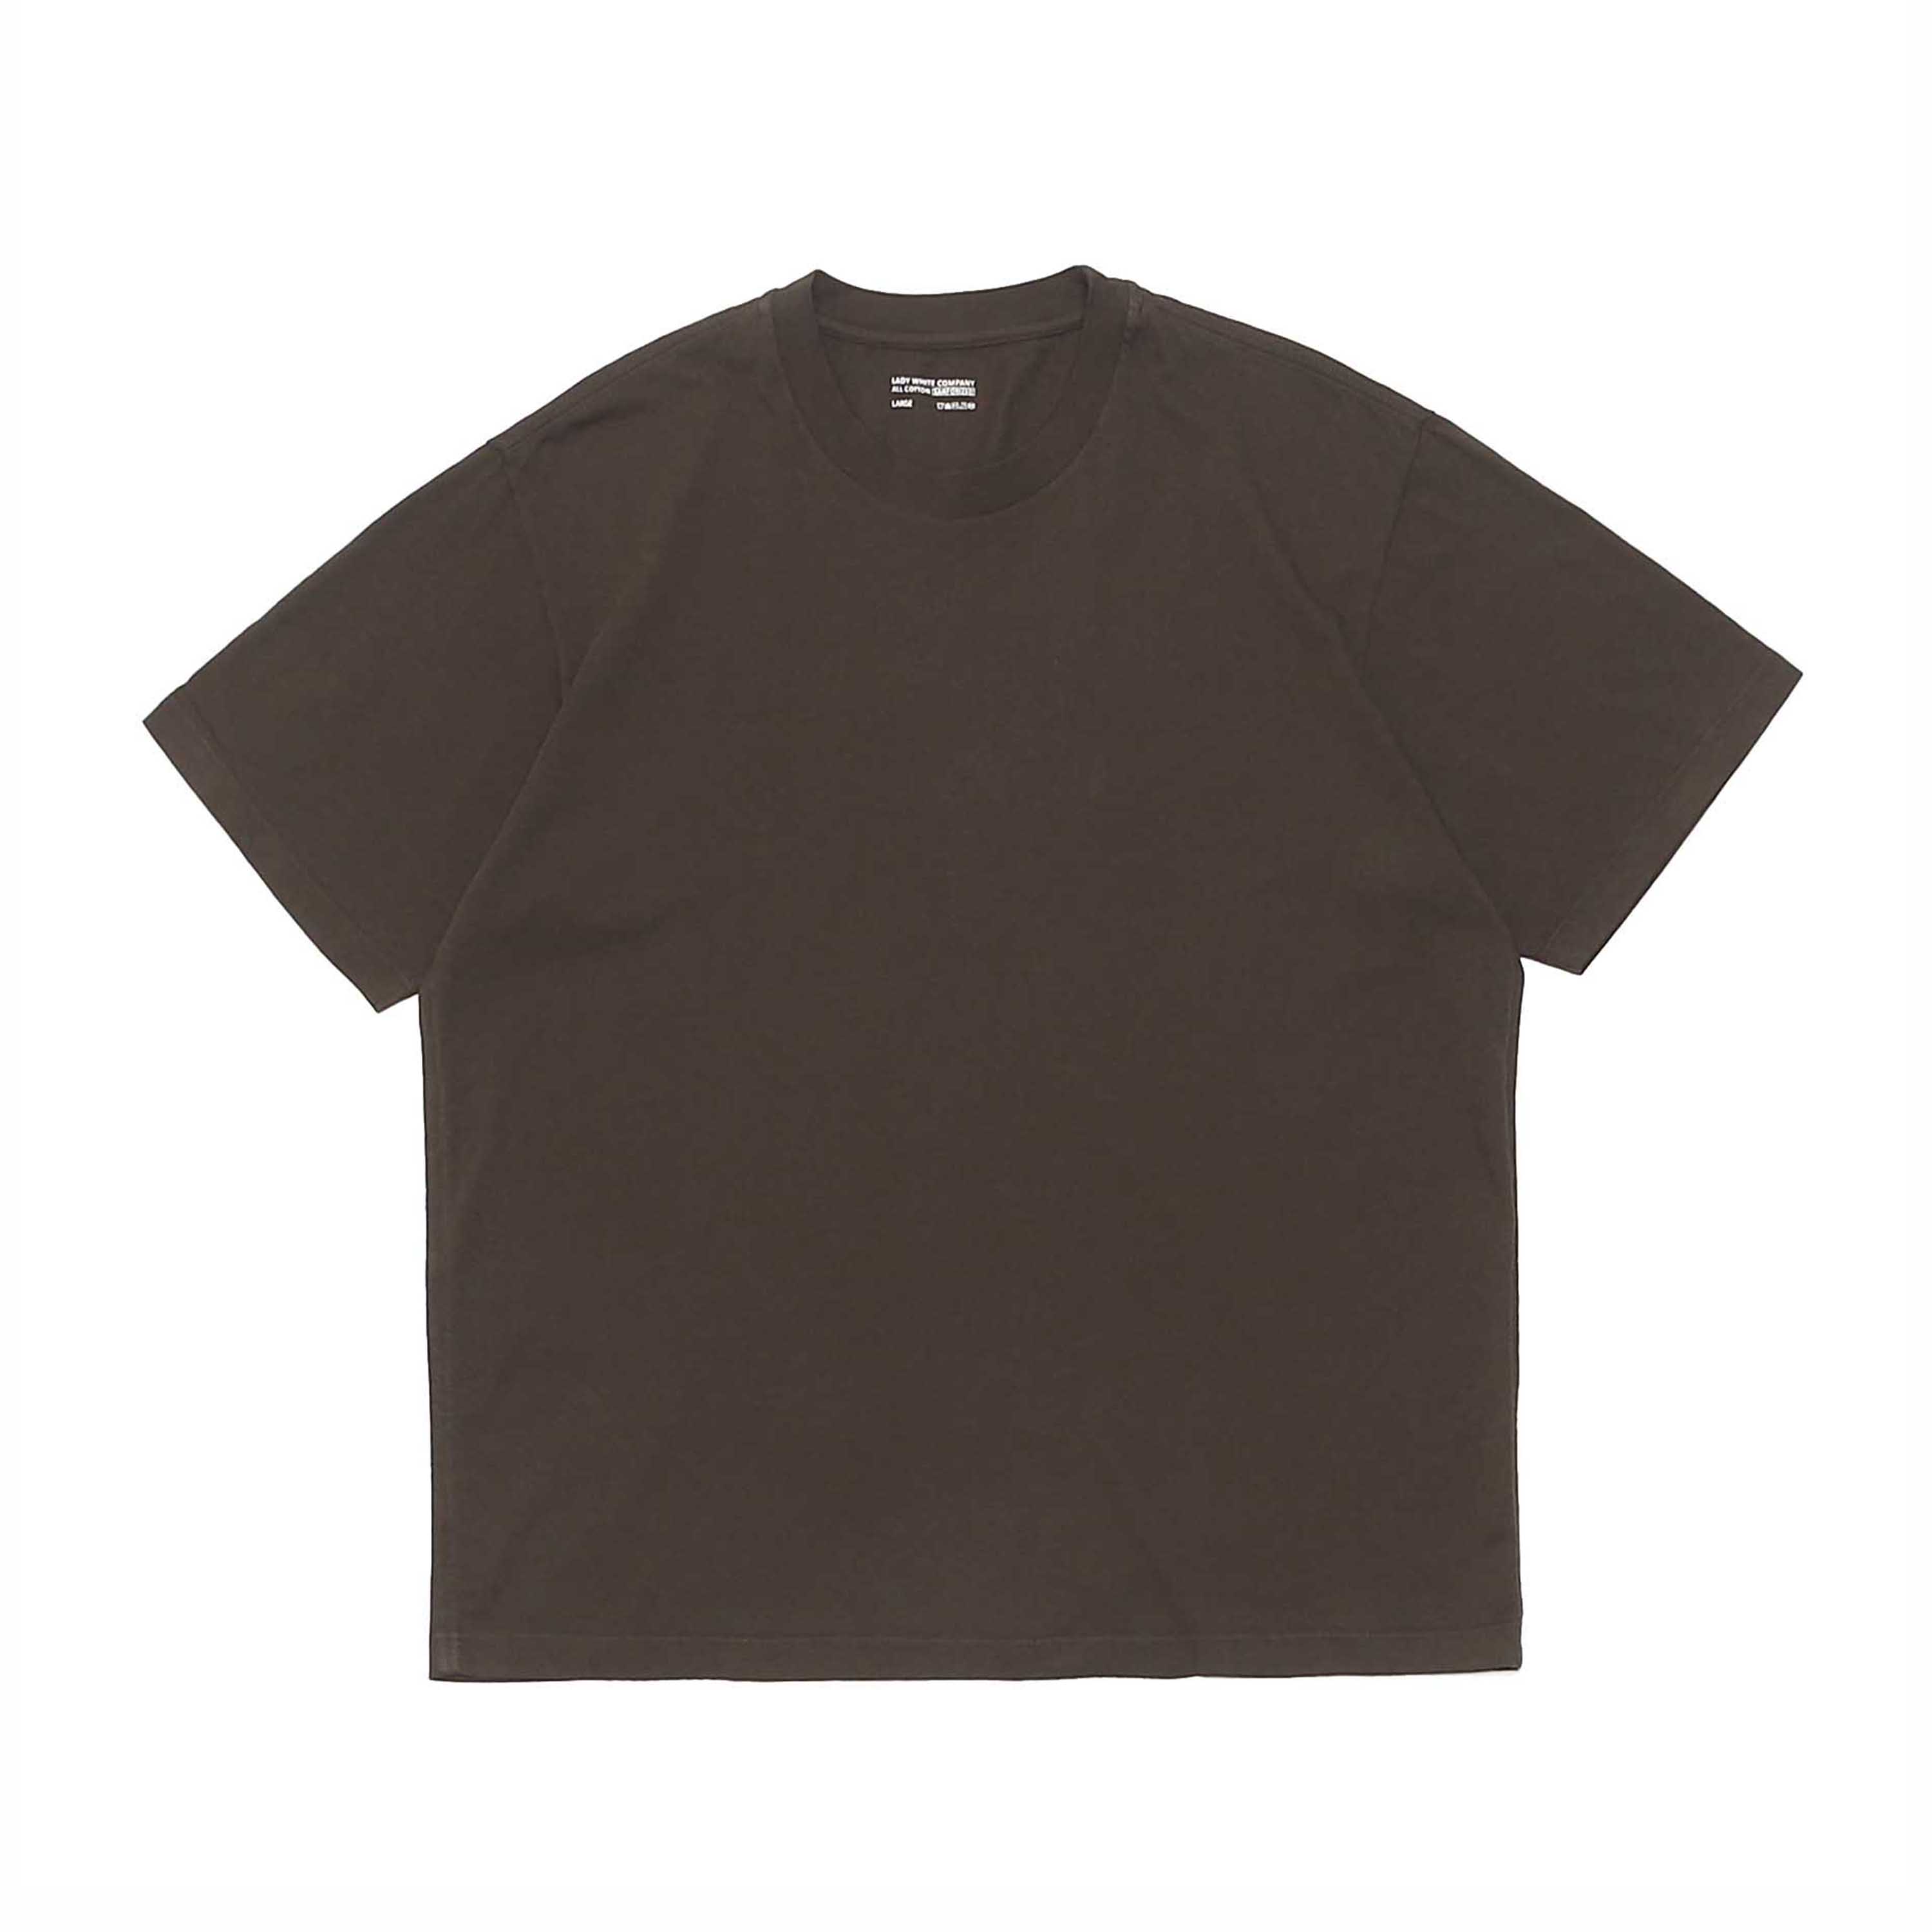 ATHENS T-SHIRT - FIELD BROWN